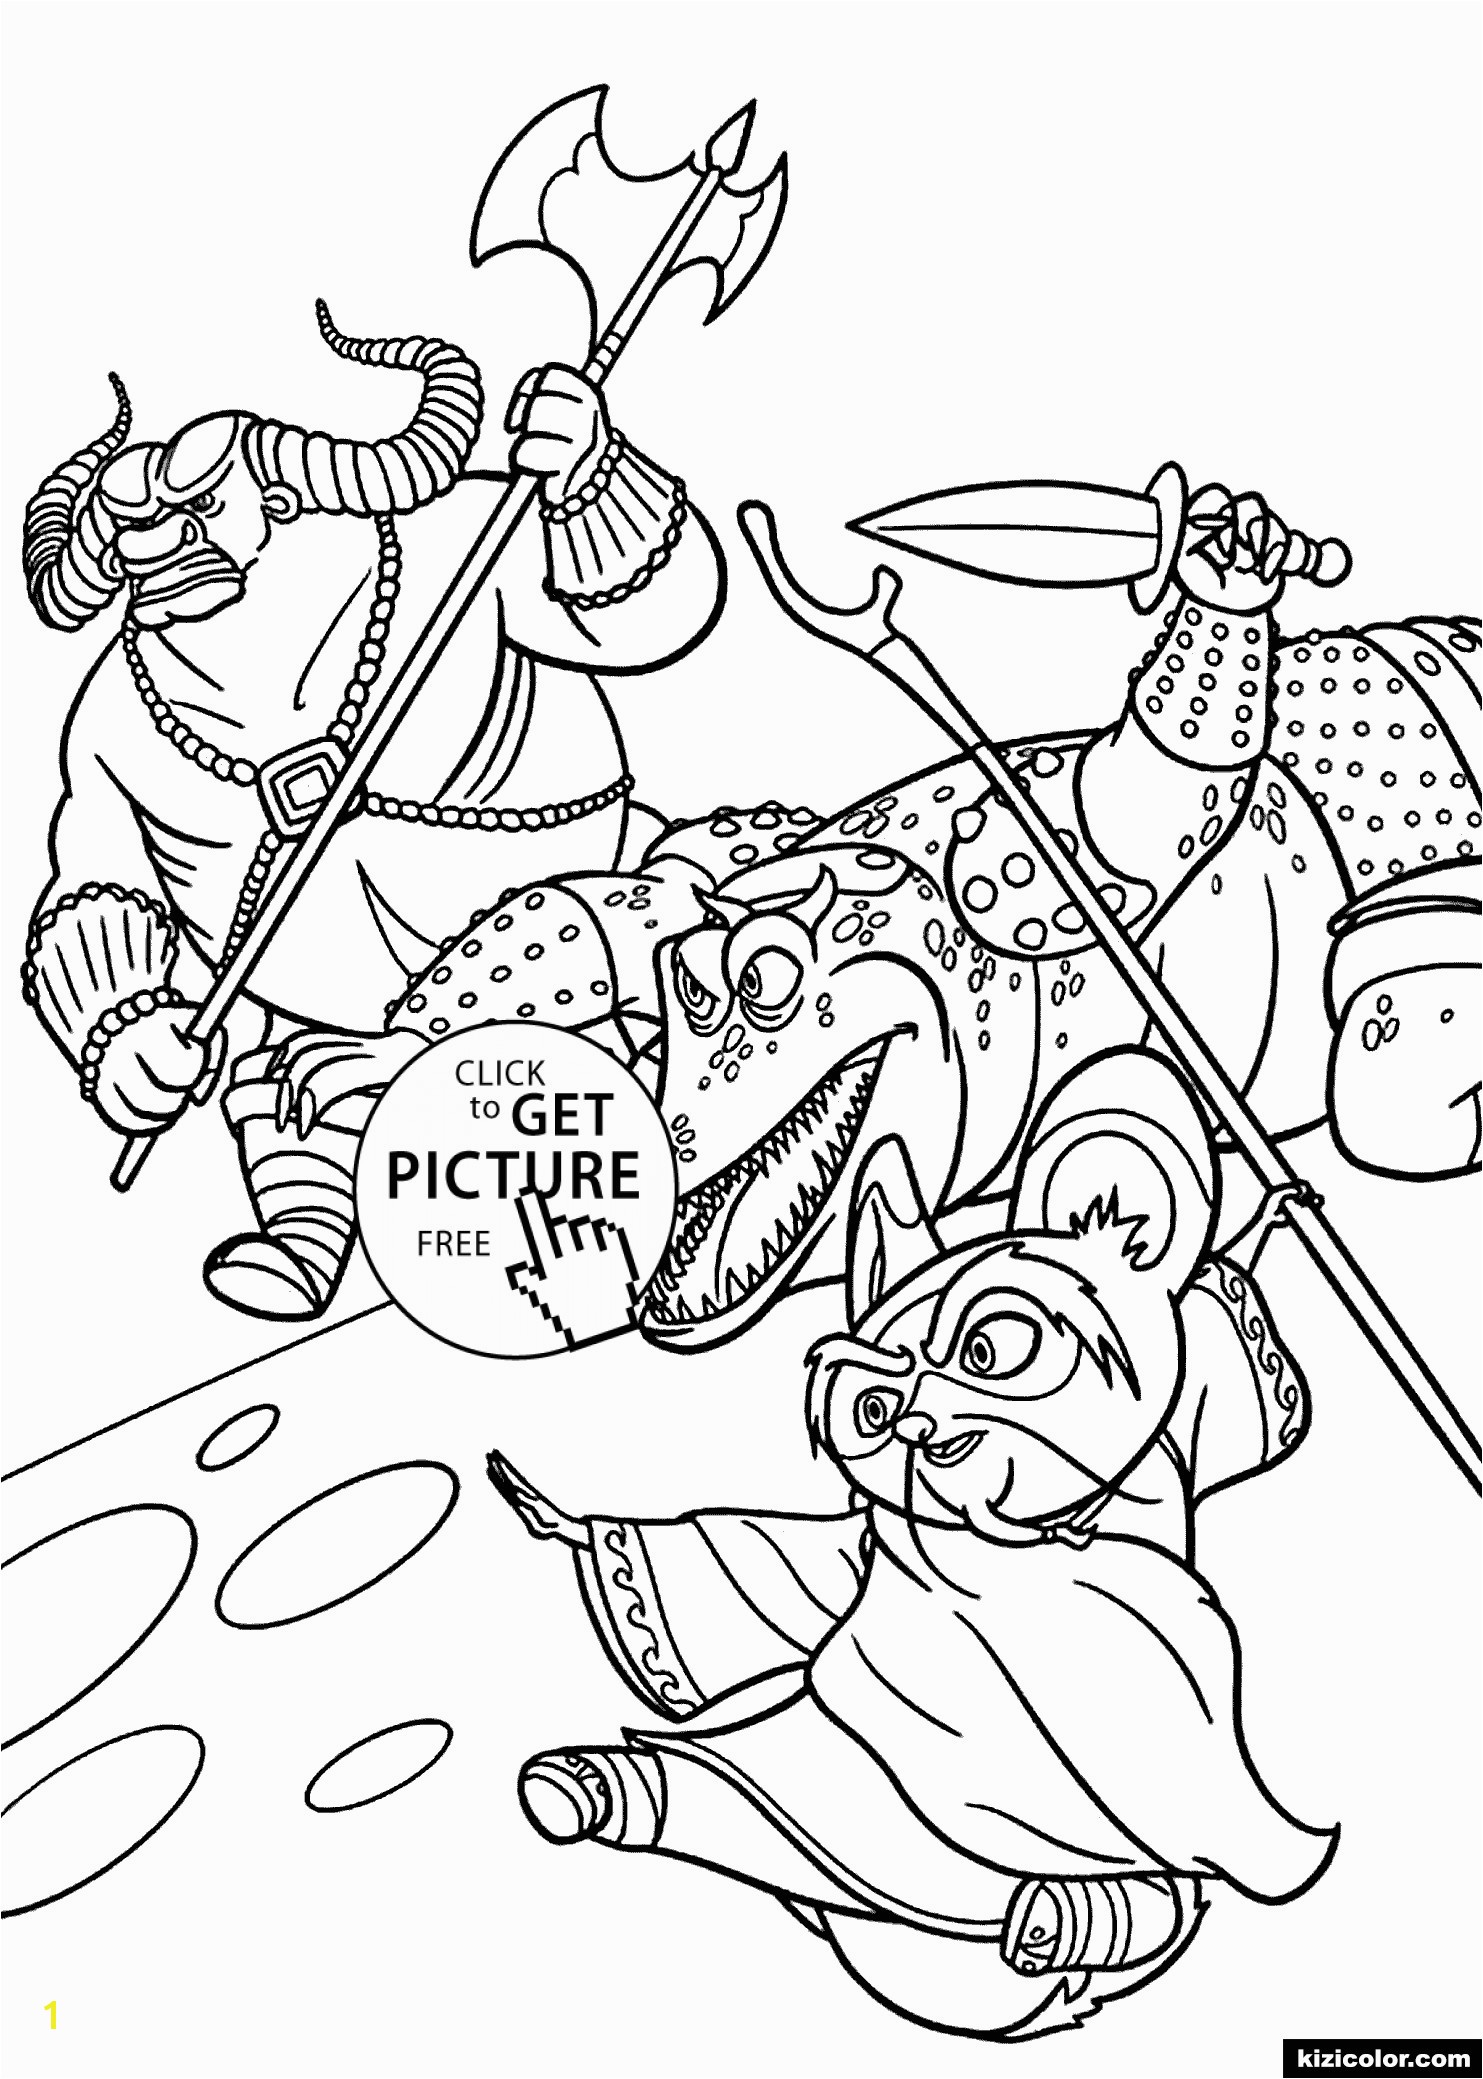 French and Indian War Coloring Pages Kung Fu Panda Master Shifu Free Printable Coloring Pages for Kids